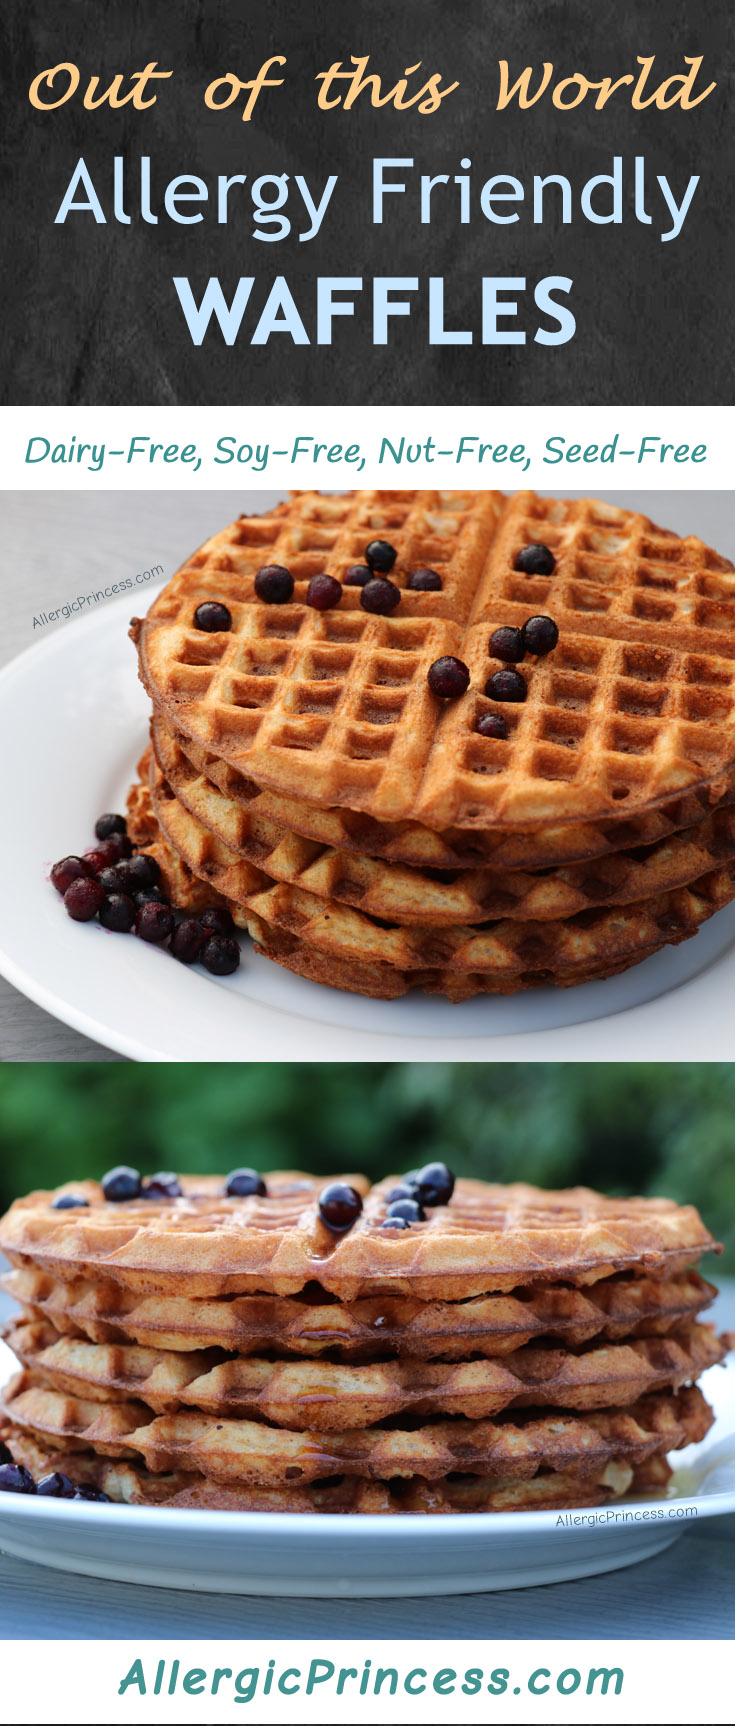 Allergy friendly waffles, dairy free, nut free, soy free, seed free